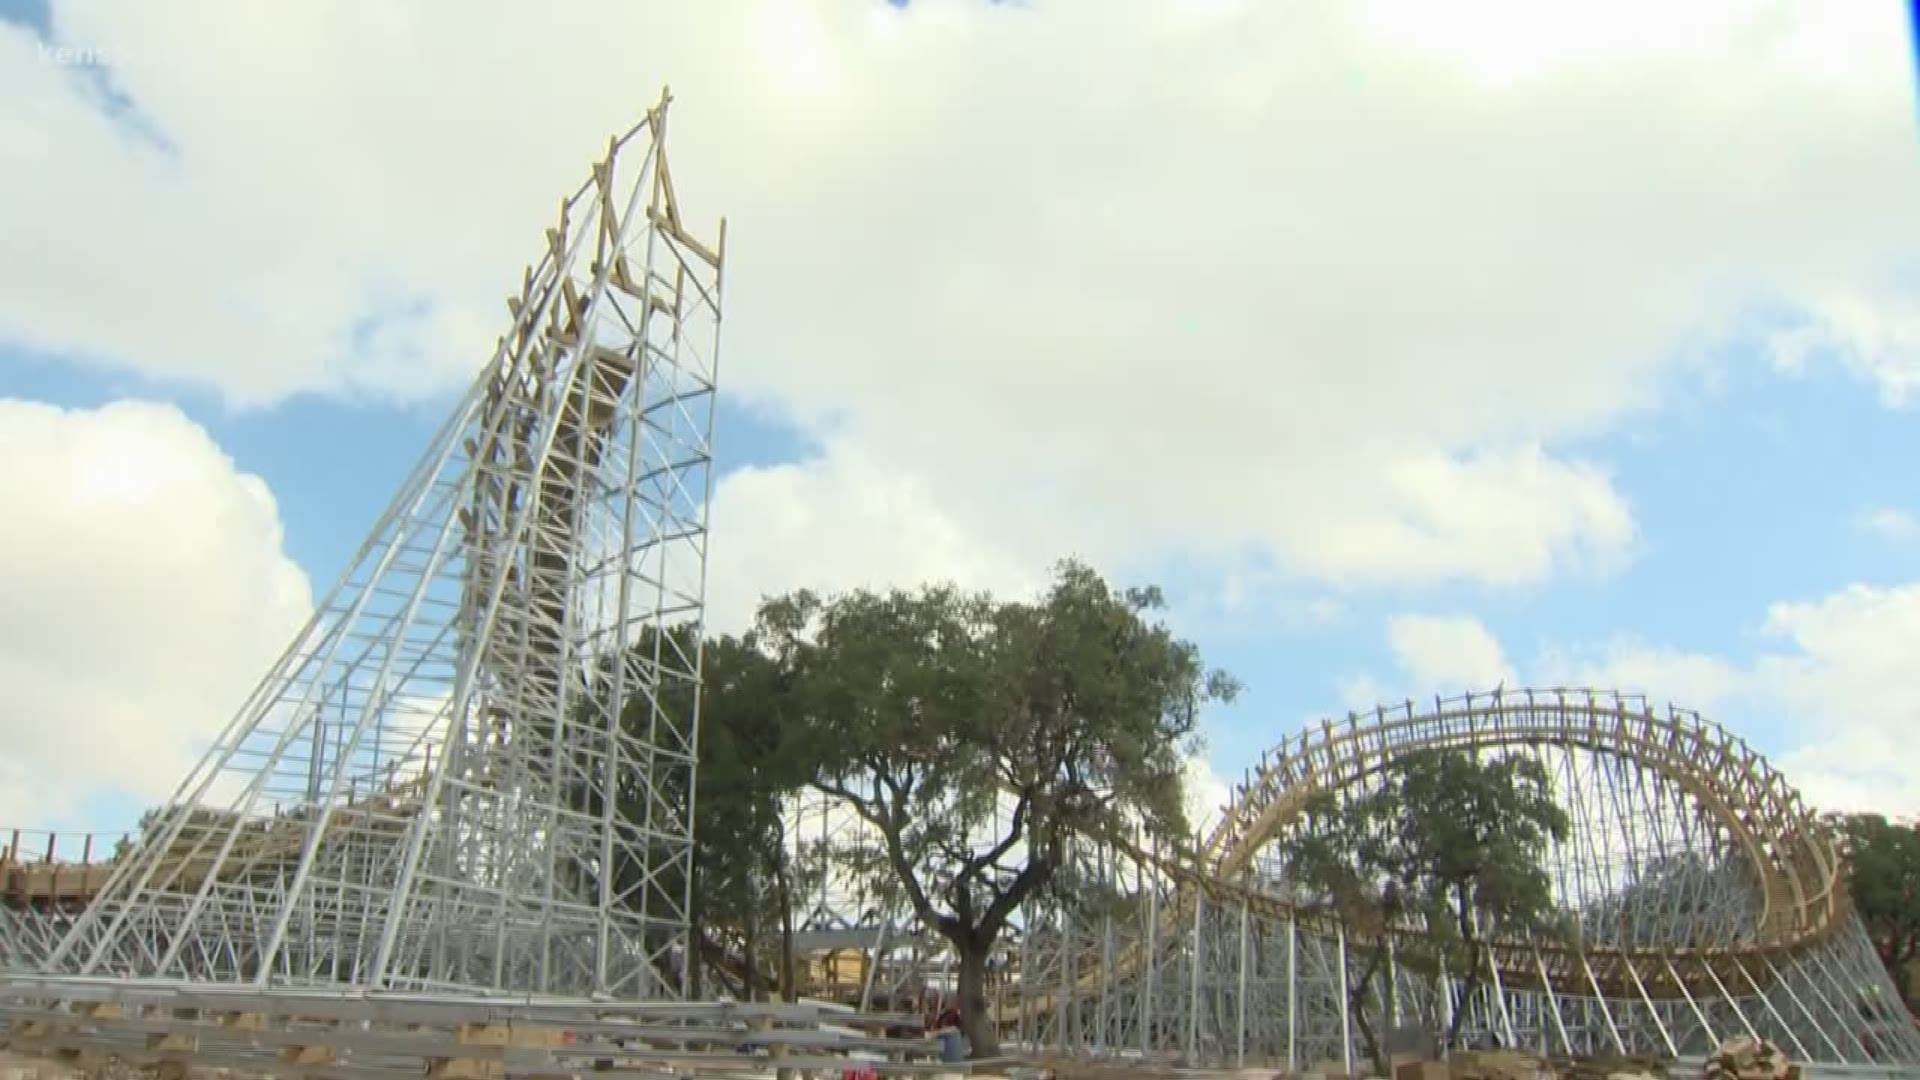 It's called the Texas Stingray and it will be the fastest, tallest, and longest wooden roller coaster in Texas! The Texas Stingray will reach a top speed of 55 miles per hour and will have a breathtaking 100-foot drop.